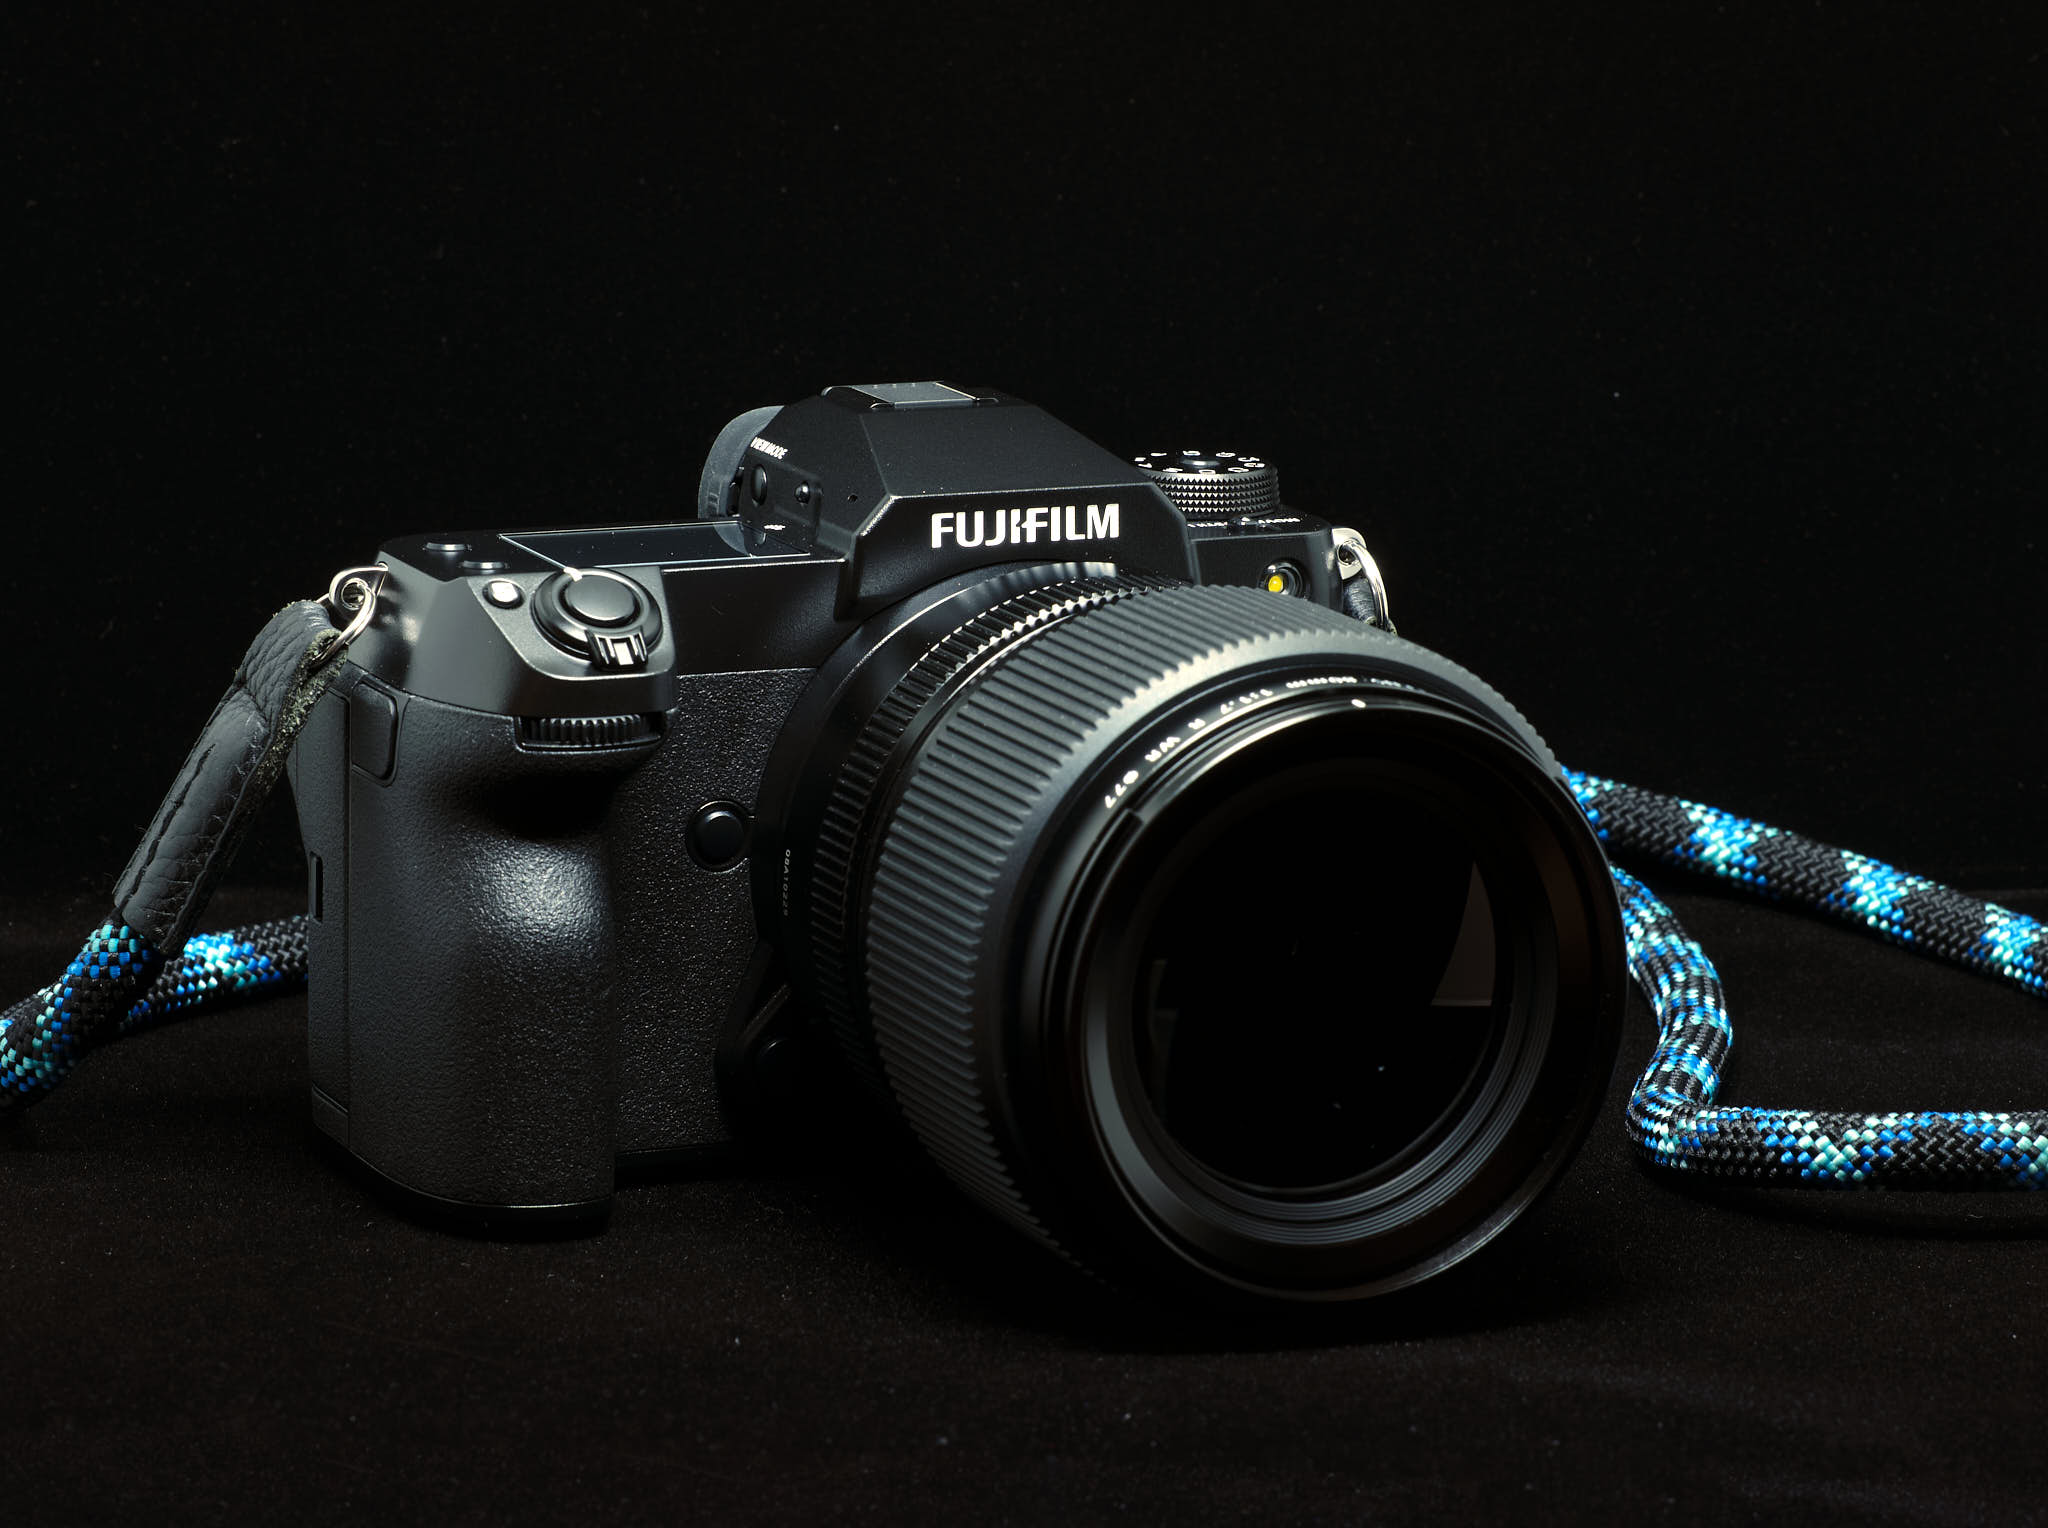 Front quarter view of Fujifilm GFX100S and GF80MM